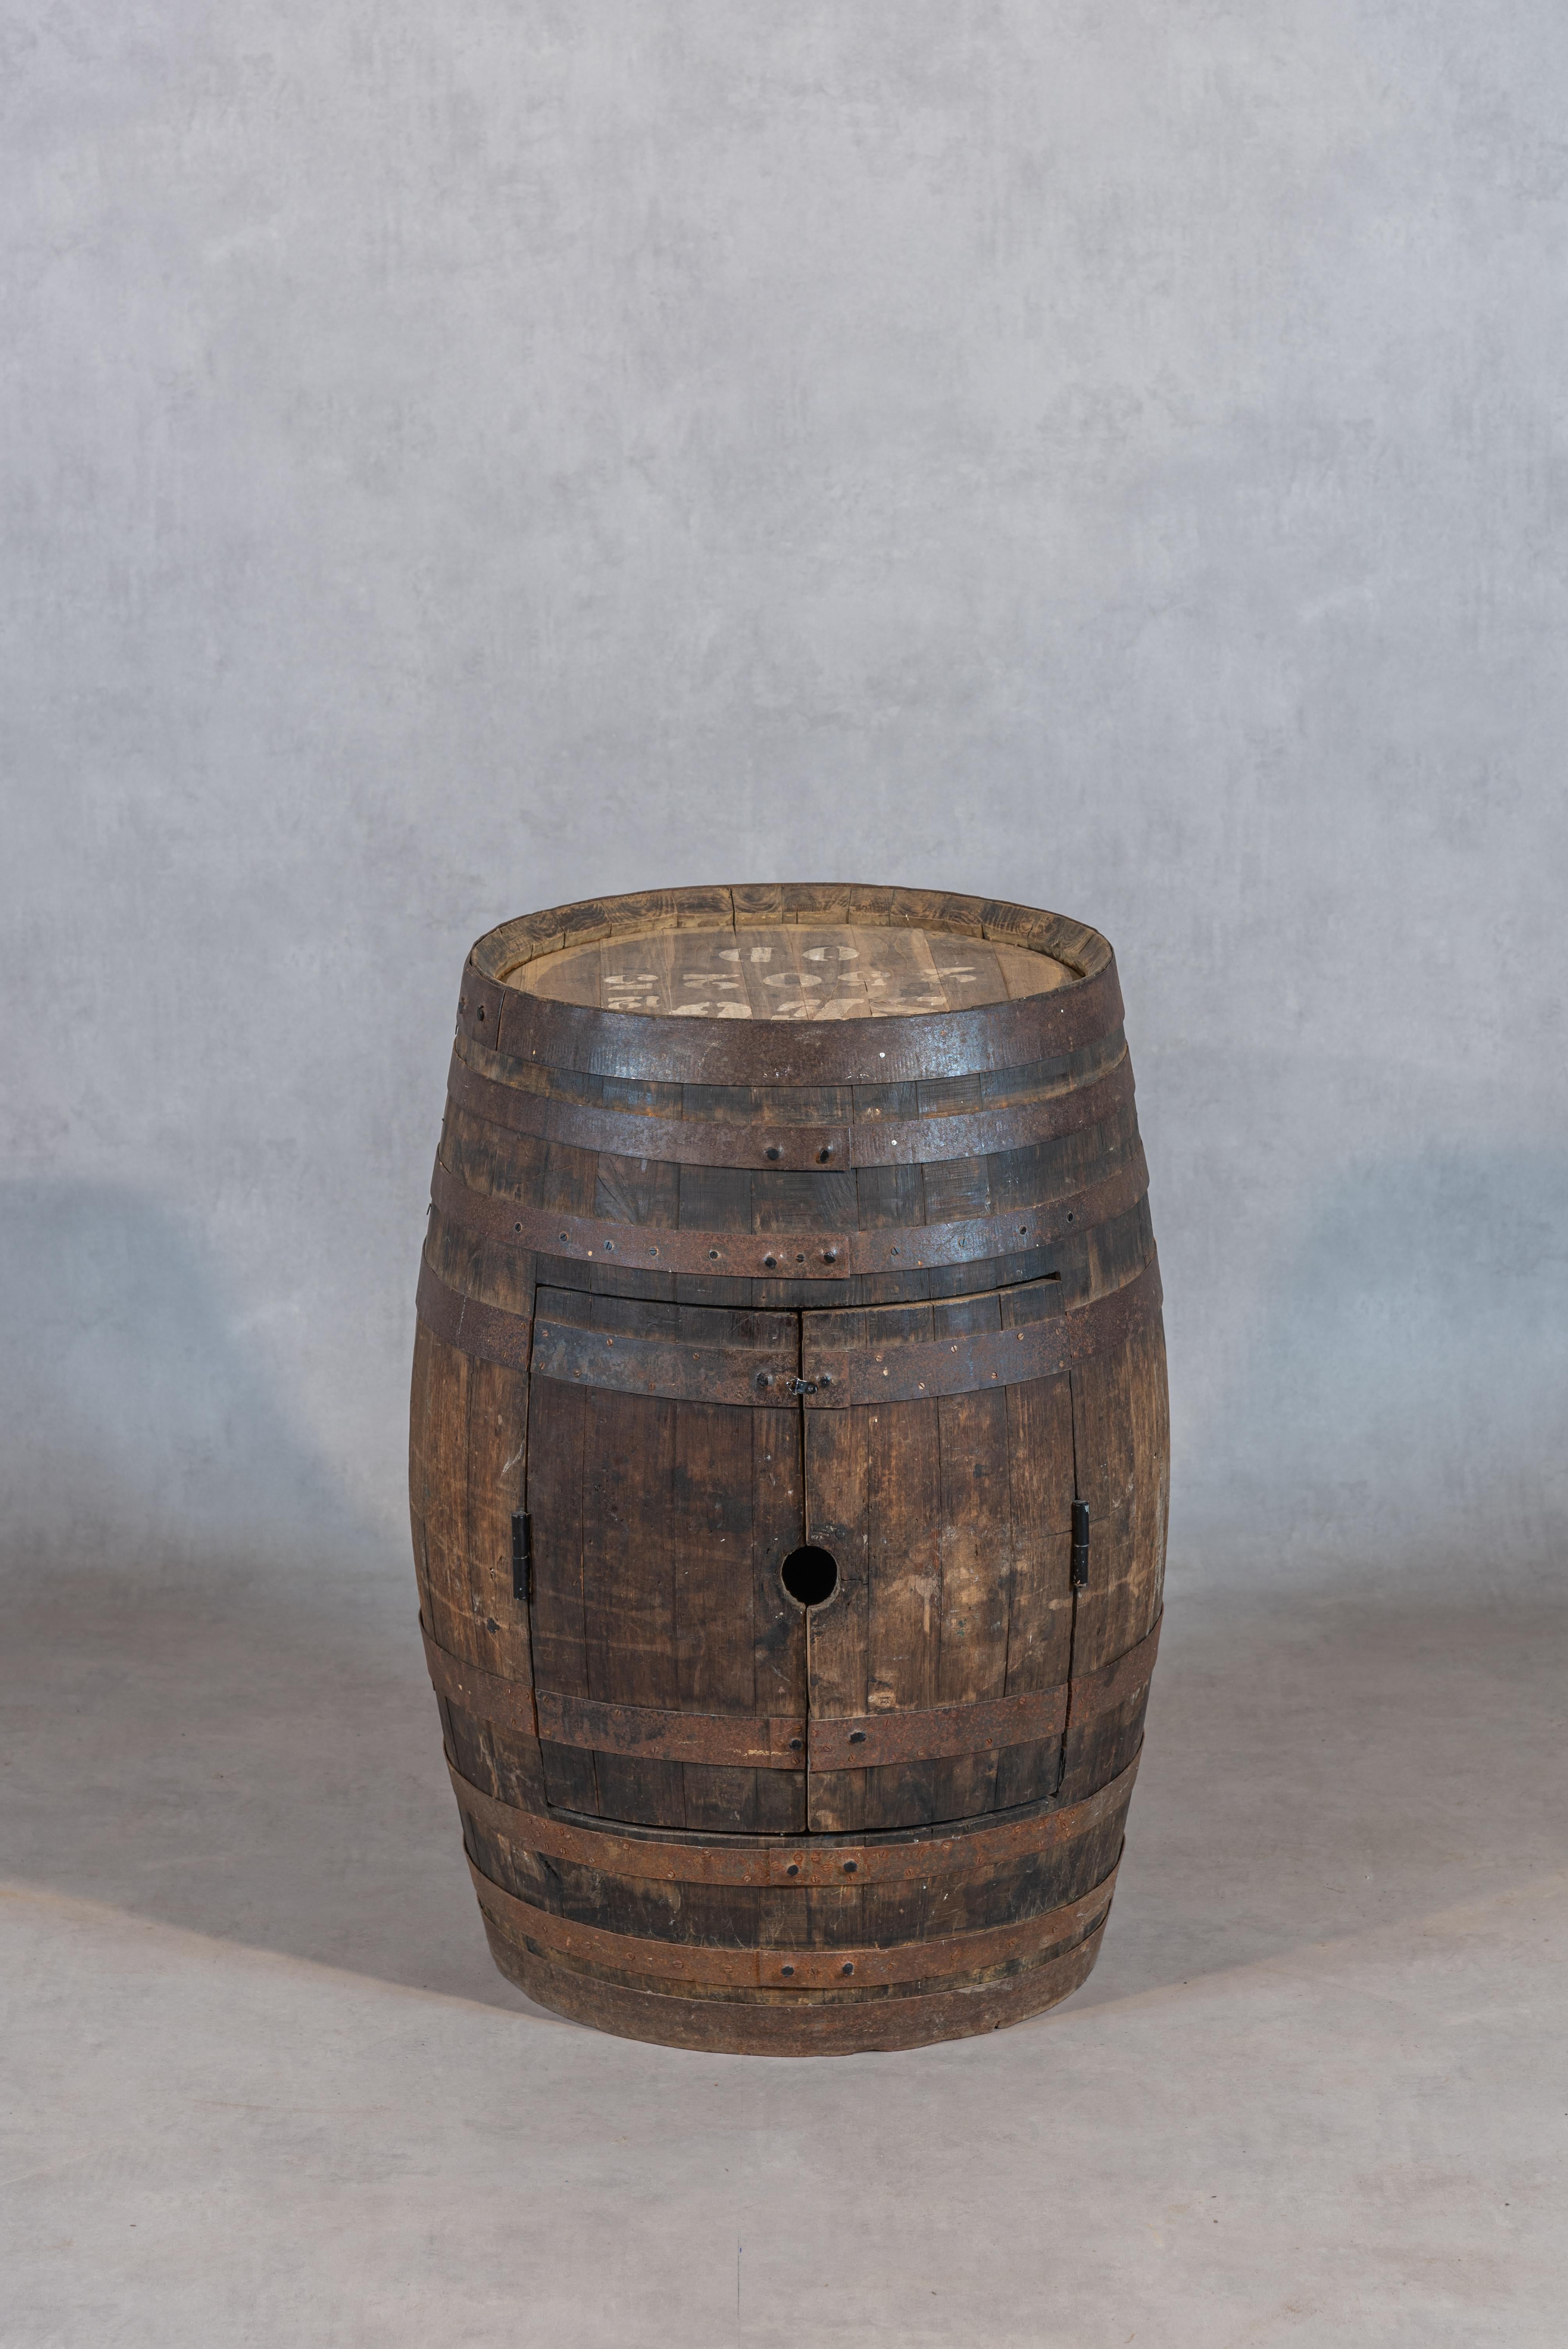 Indulge in the timeless charm of a superb 20th-century French antique barrel bar or Tonneau, a captivating piece that evokes the rustic allure of French chateaux wineries. This exquisite barrel exudes vintage appeal with its charming, weathered